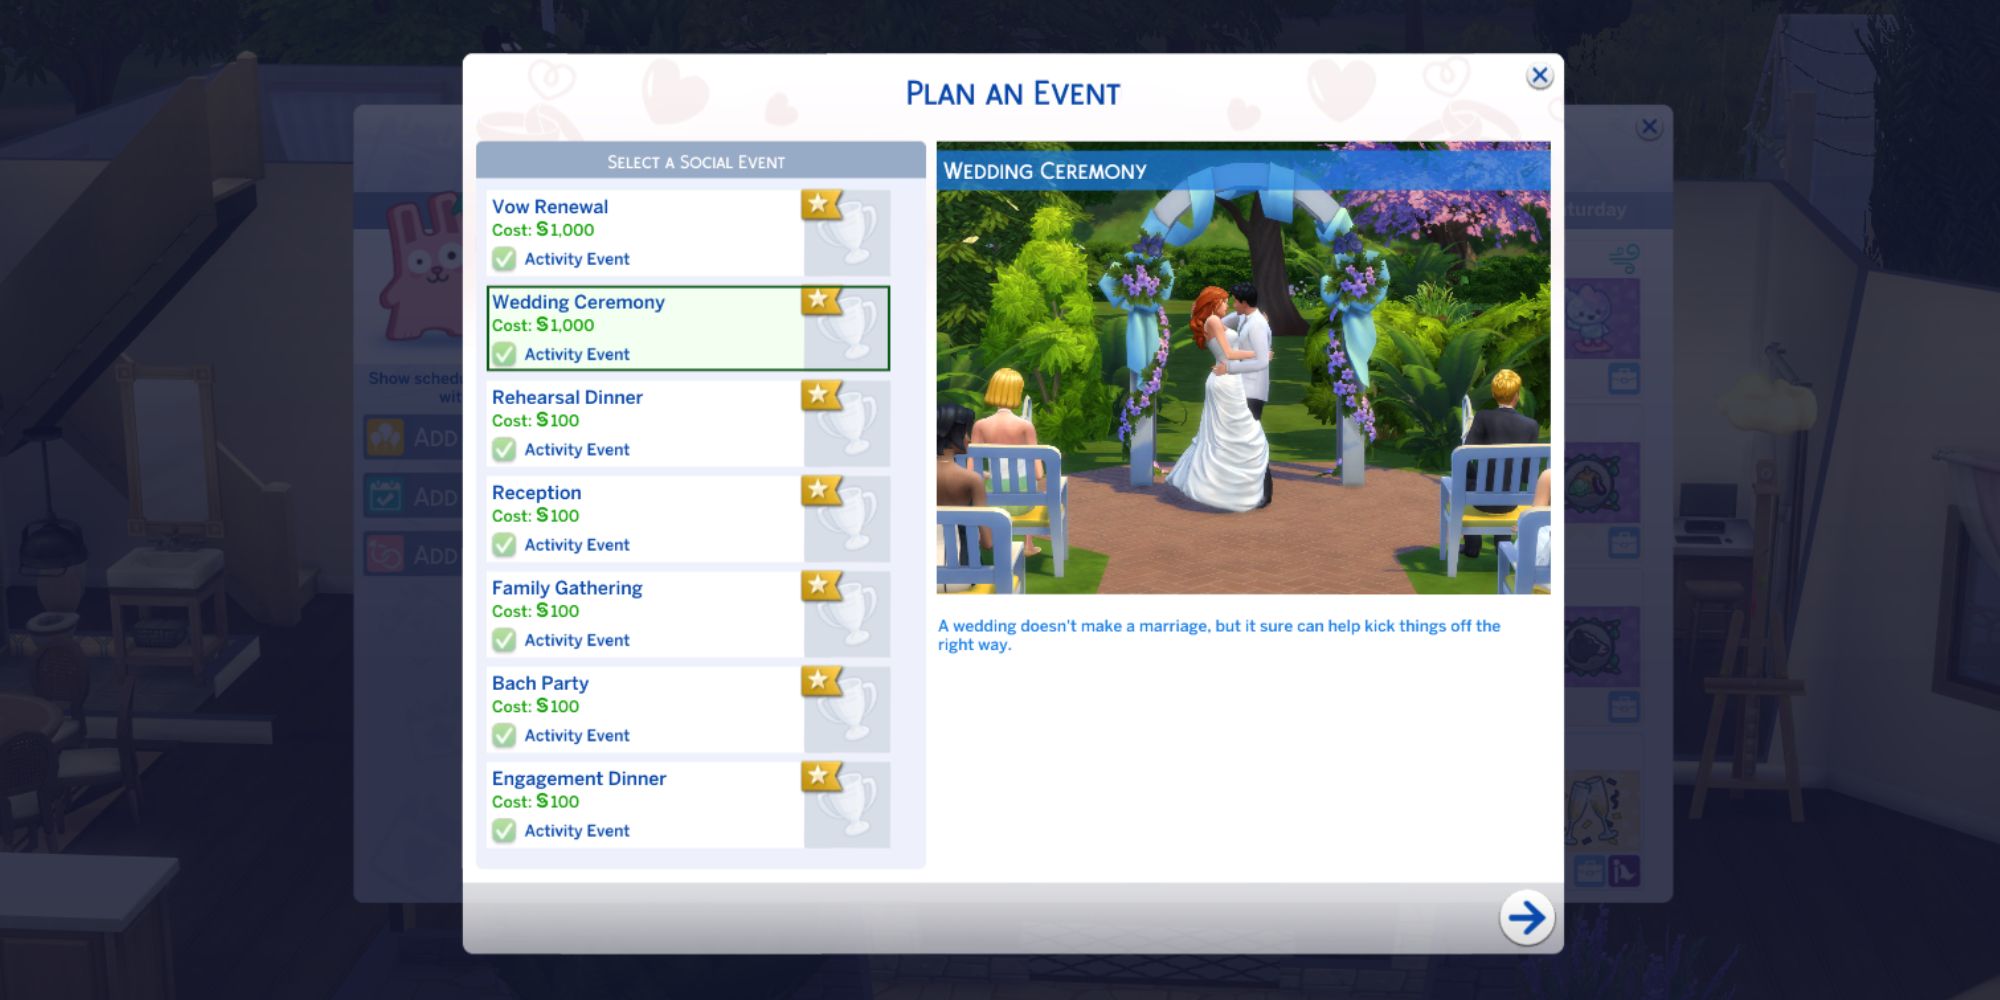 Sims 4 weddings plan an event page with wedding ceremony selected